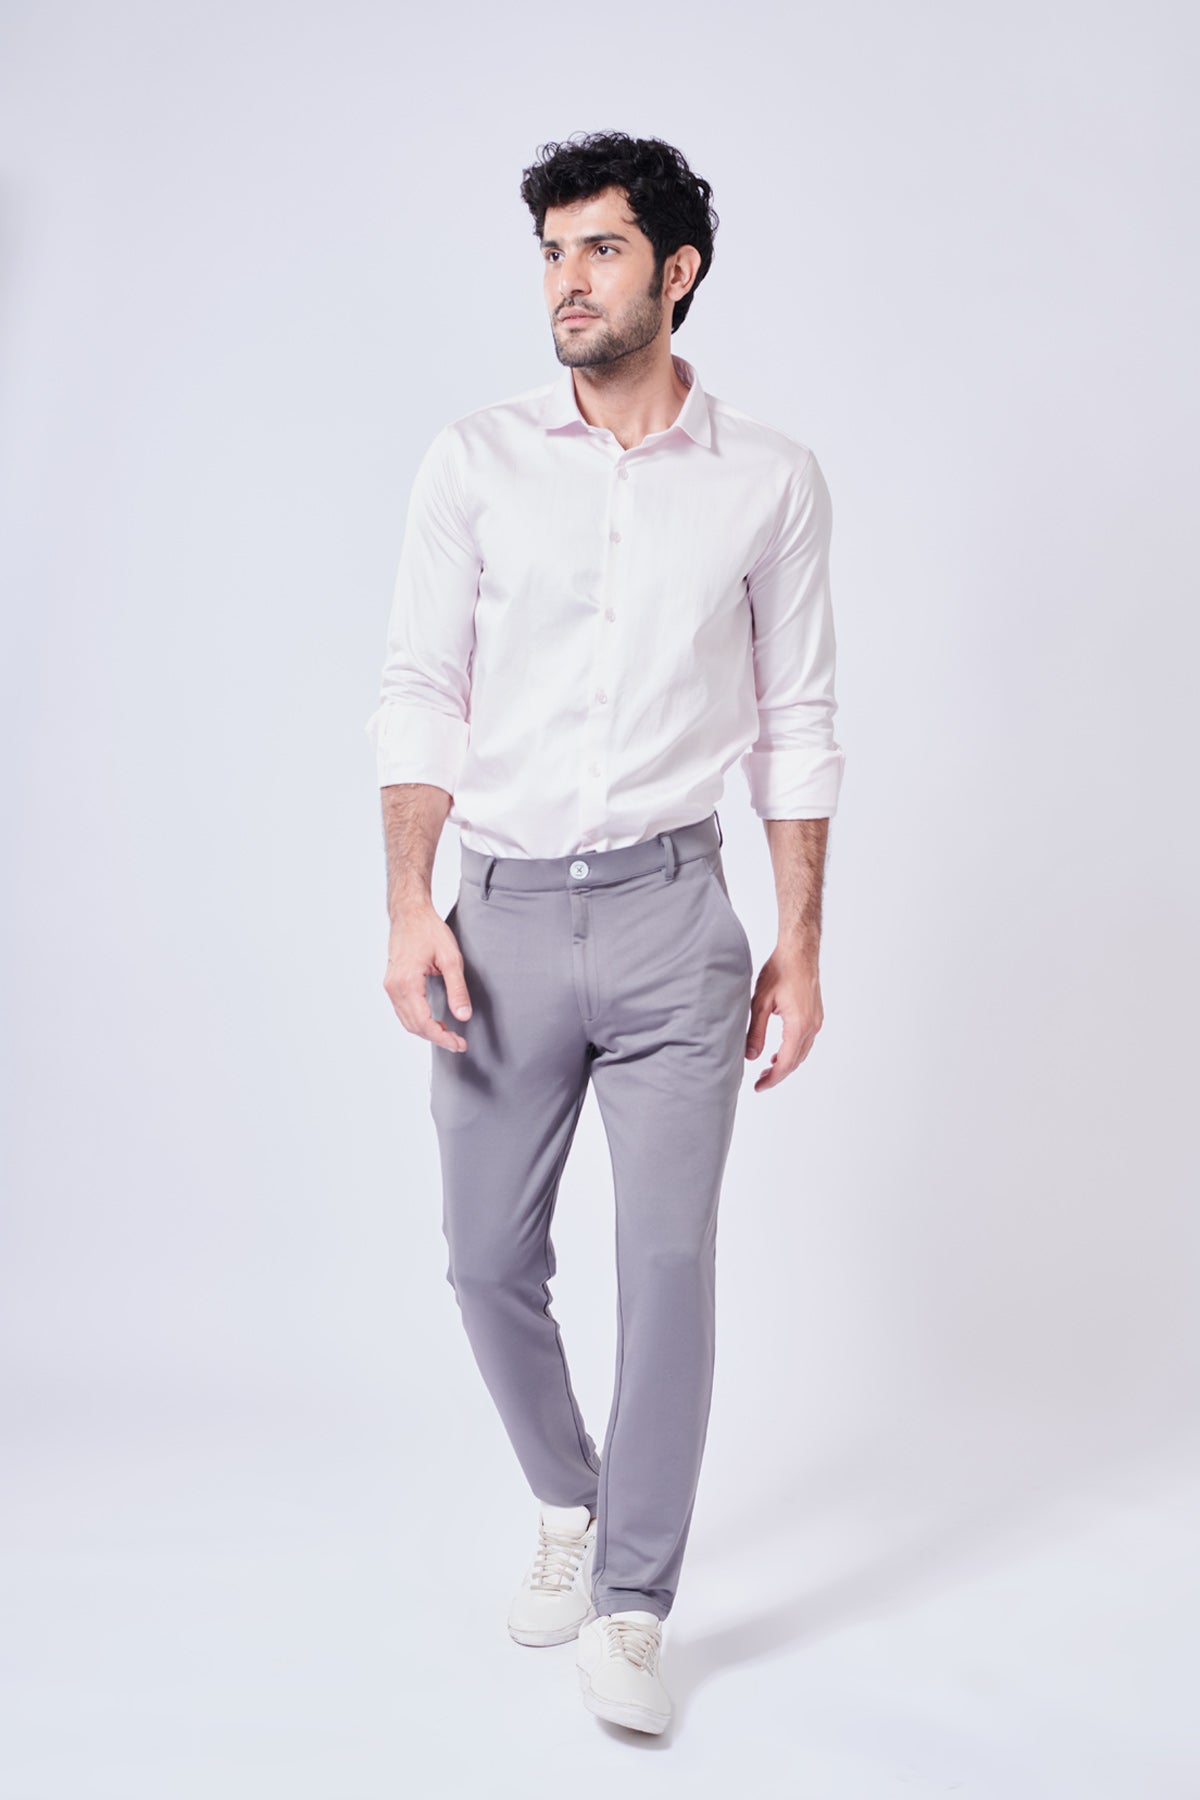 Buy Midnight Voilet Formal and casual Pant online for men | Beyours